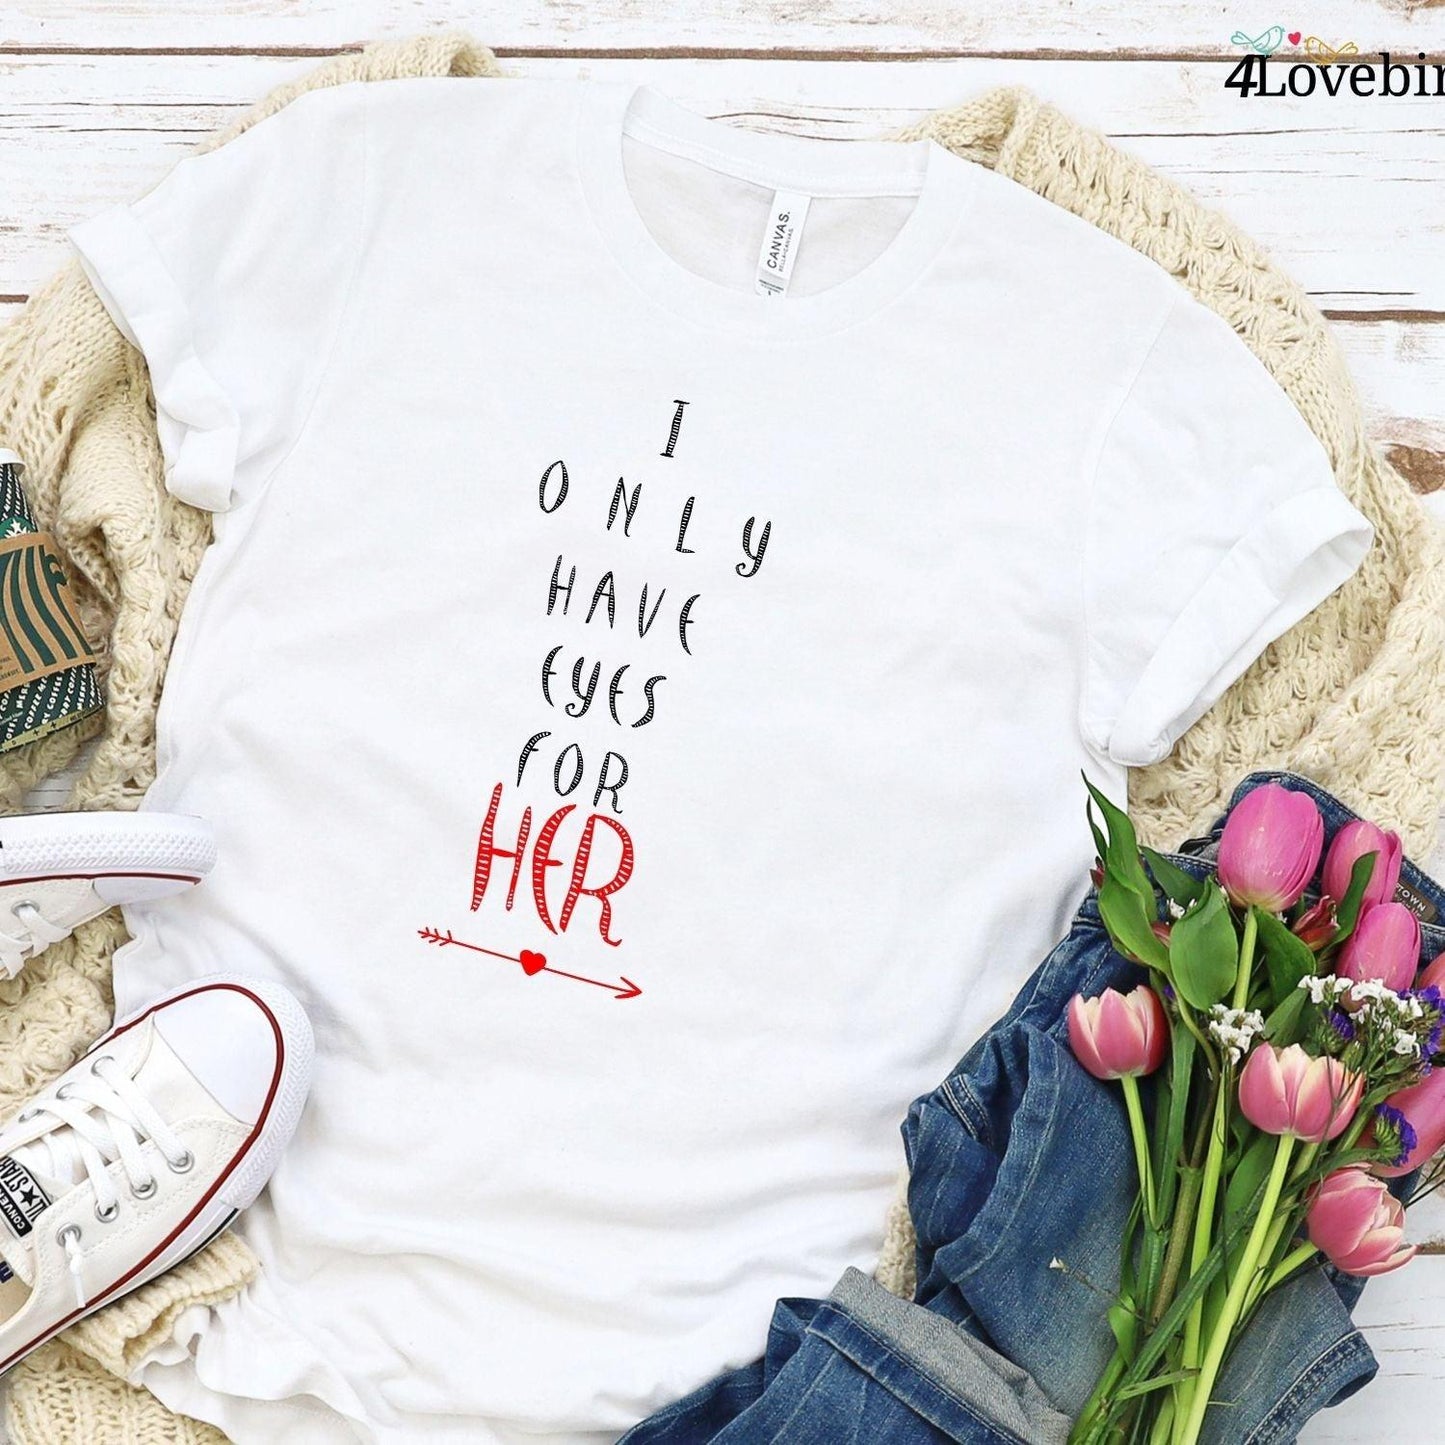 Couples' Matching Outfits - Exclusive "I Only Have Eyes for Her/Him" Gift Set - 4Lovebirds